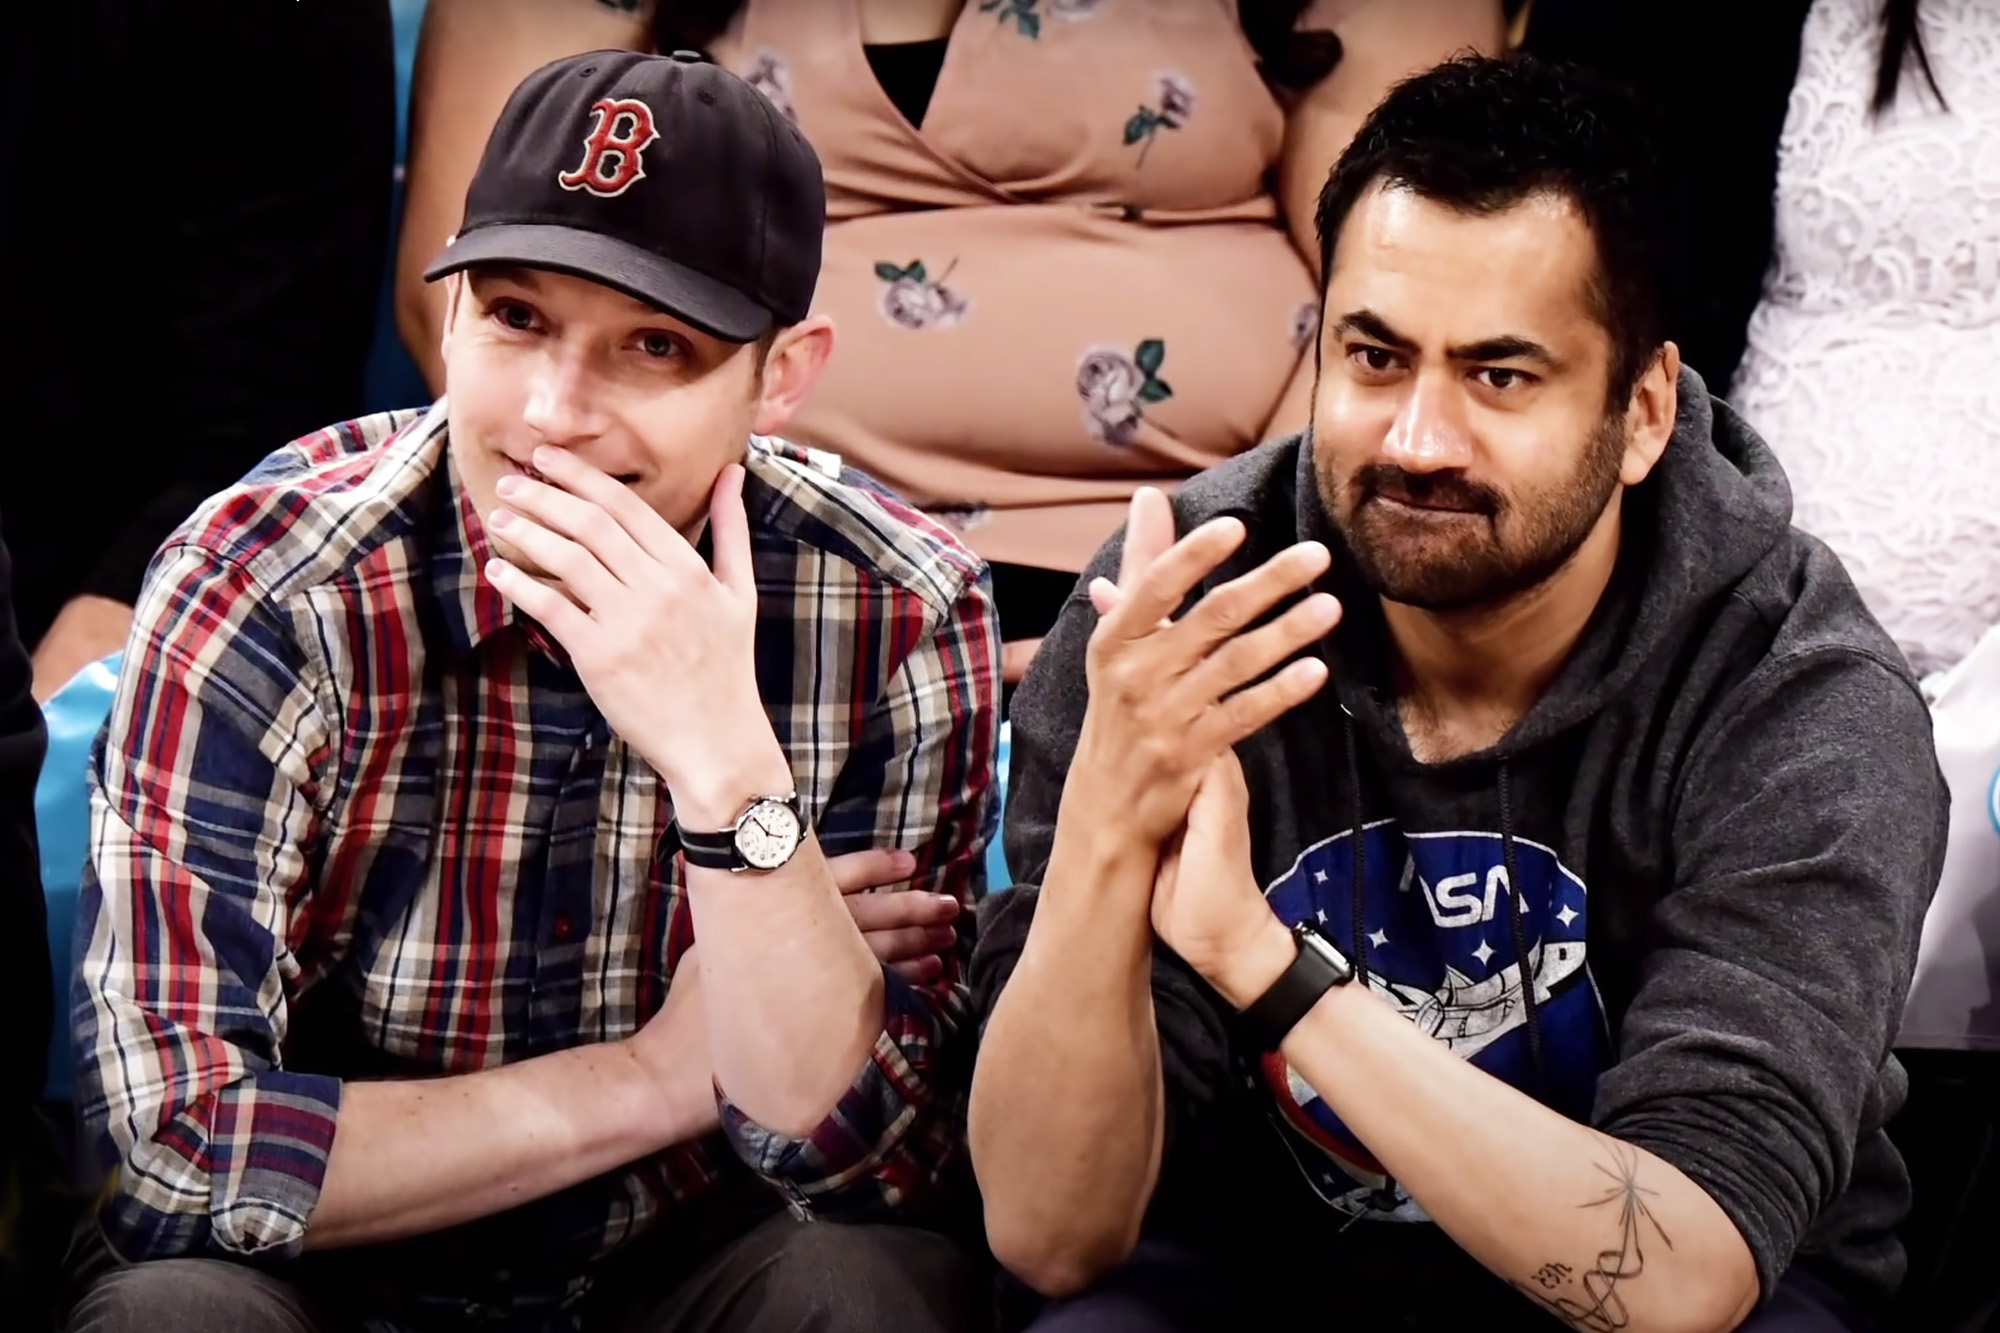 Two unexpected revelations from Kal Penn – he’s gay and he’s engaged!